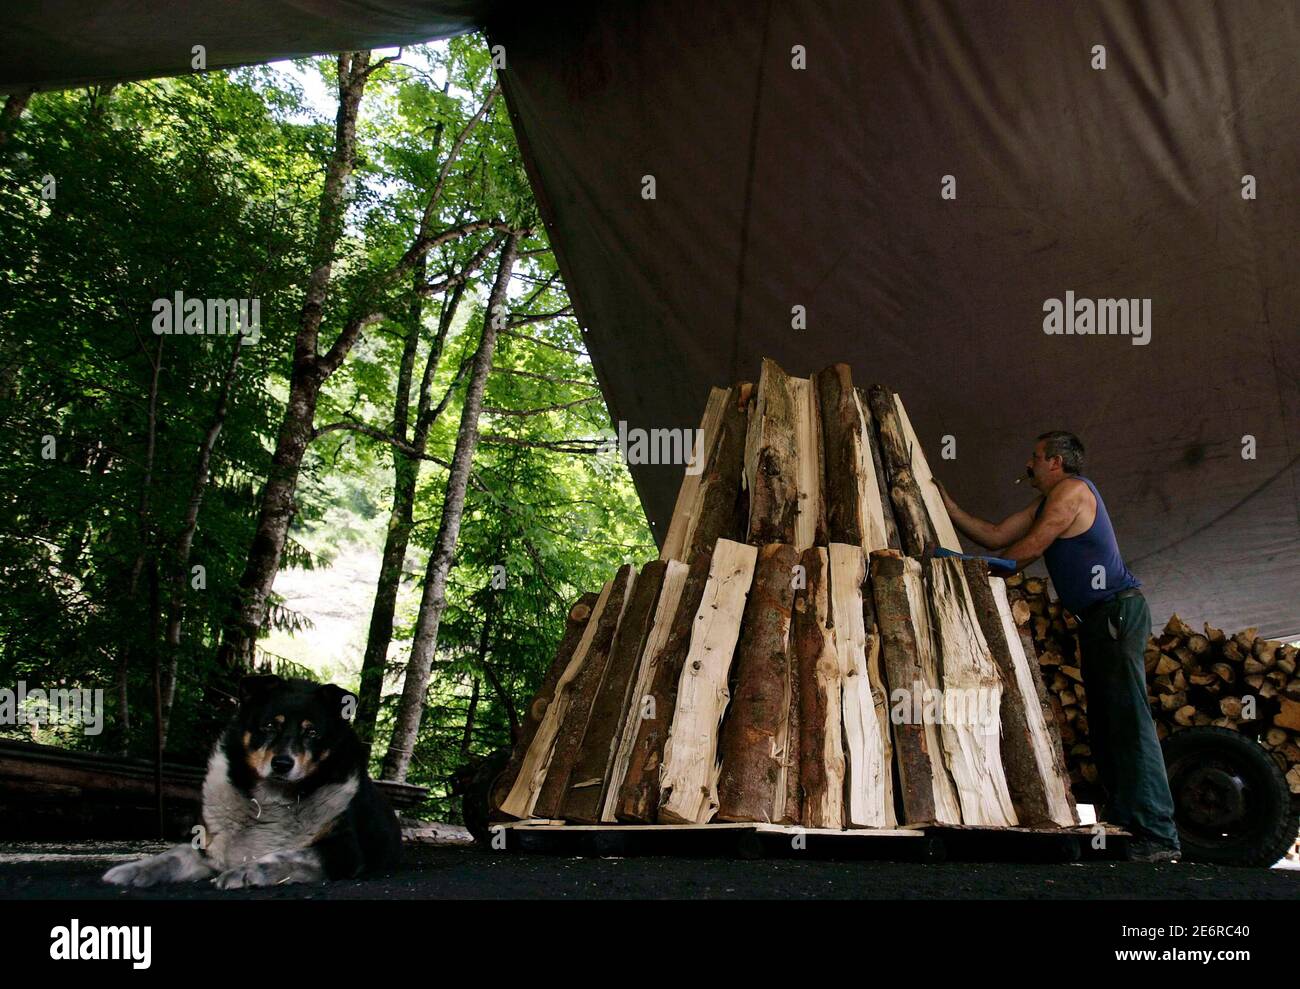 Swiss farmer and charcoal maker Markus Wicki arranges a pile of tree trunks  which will be used to make charcoal, near the remote village of Romoos,  central Switzerland in this June 12,